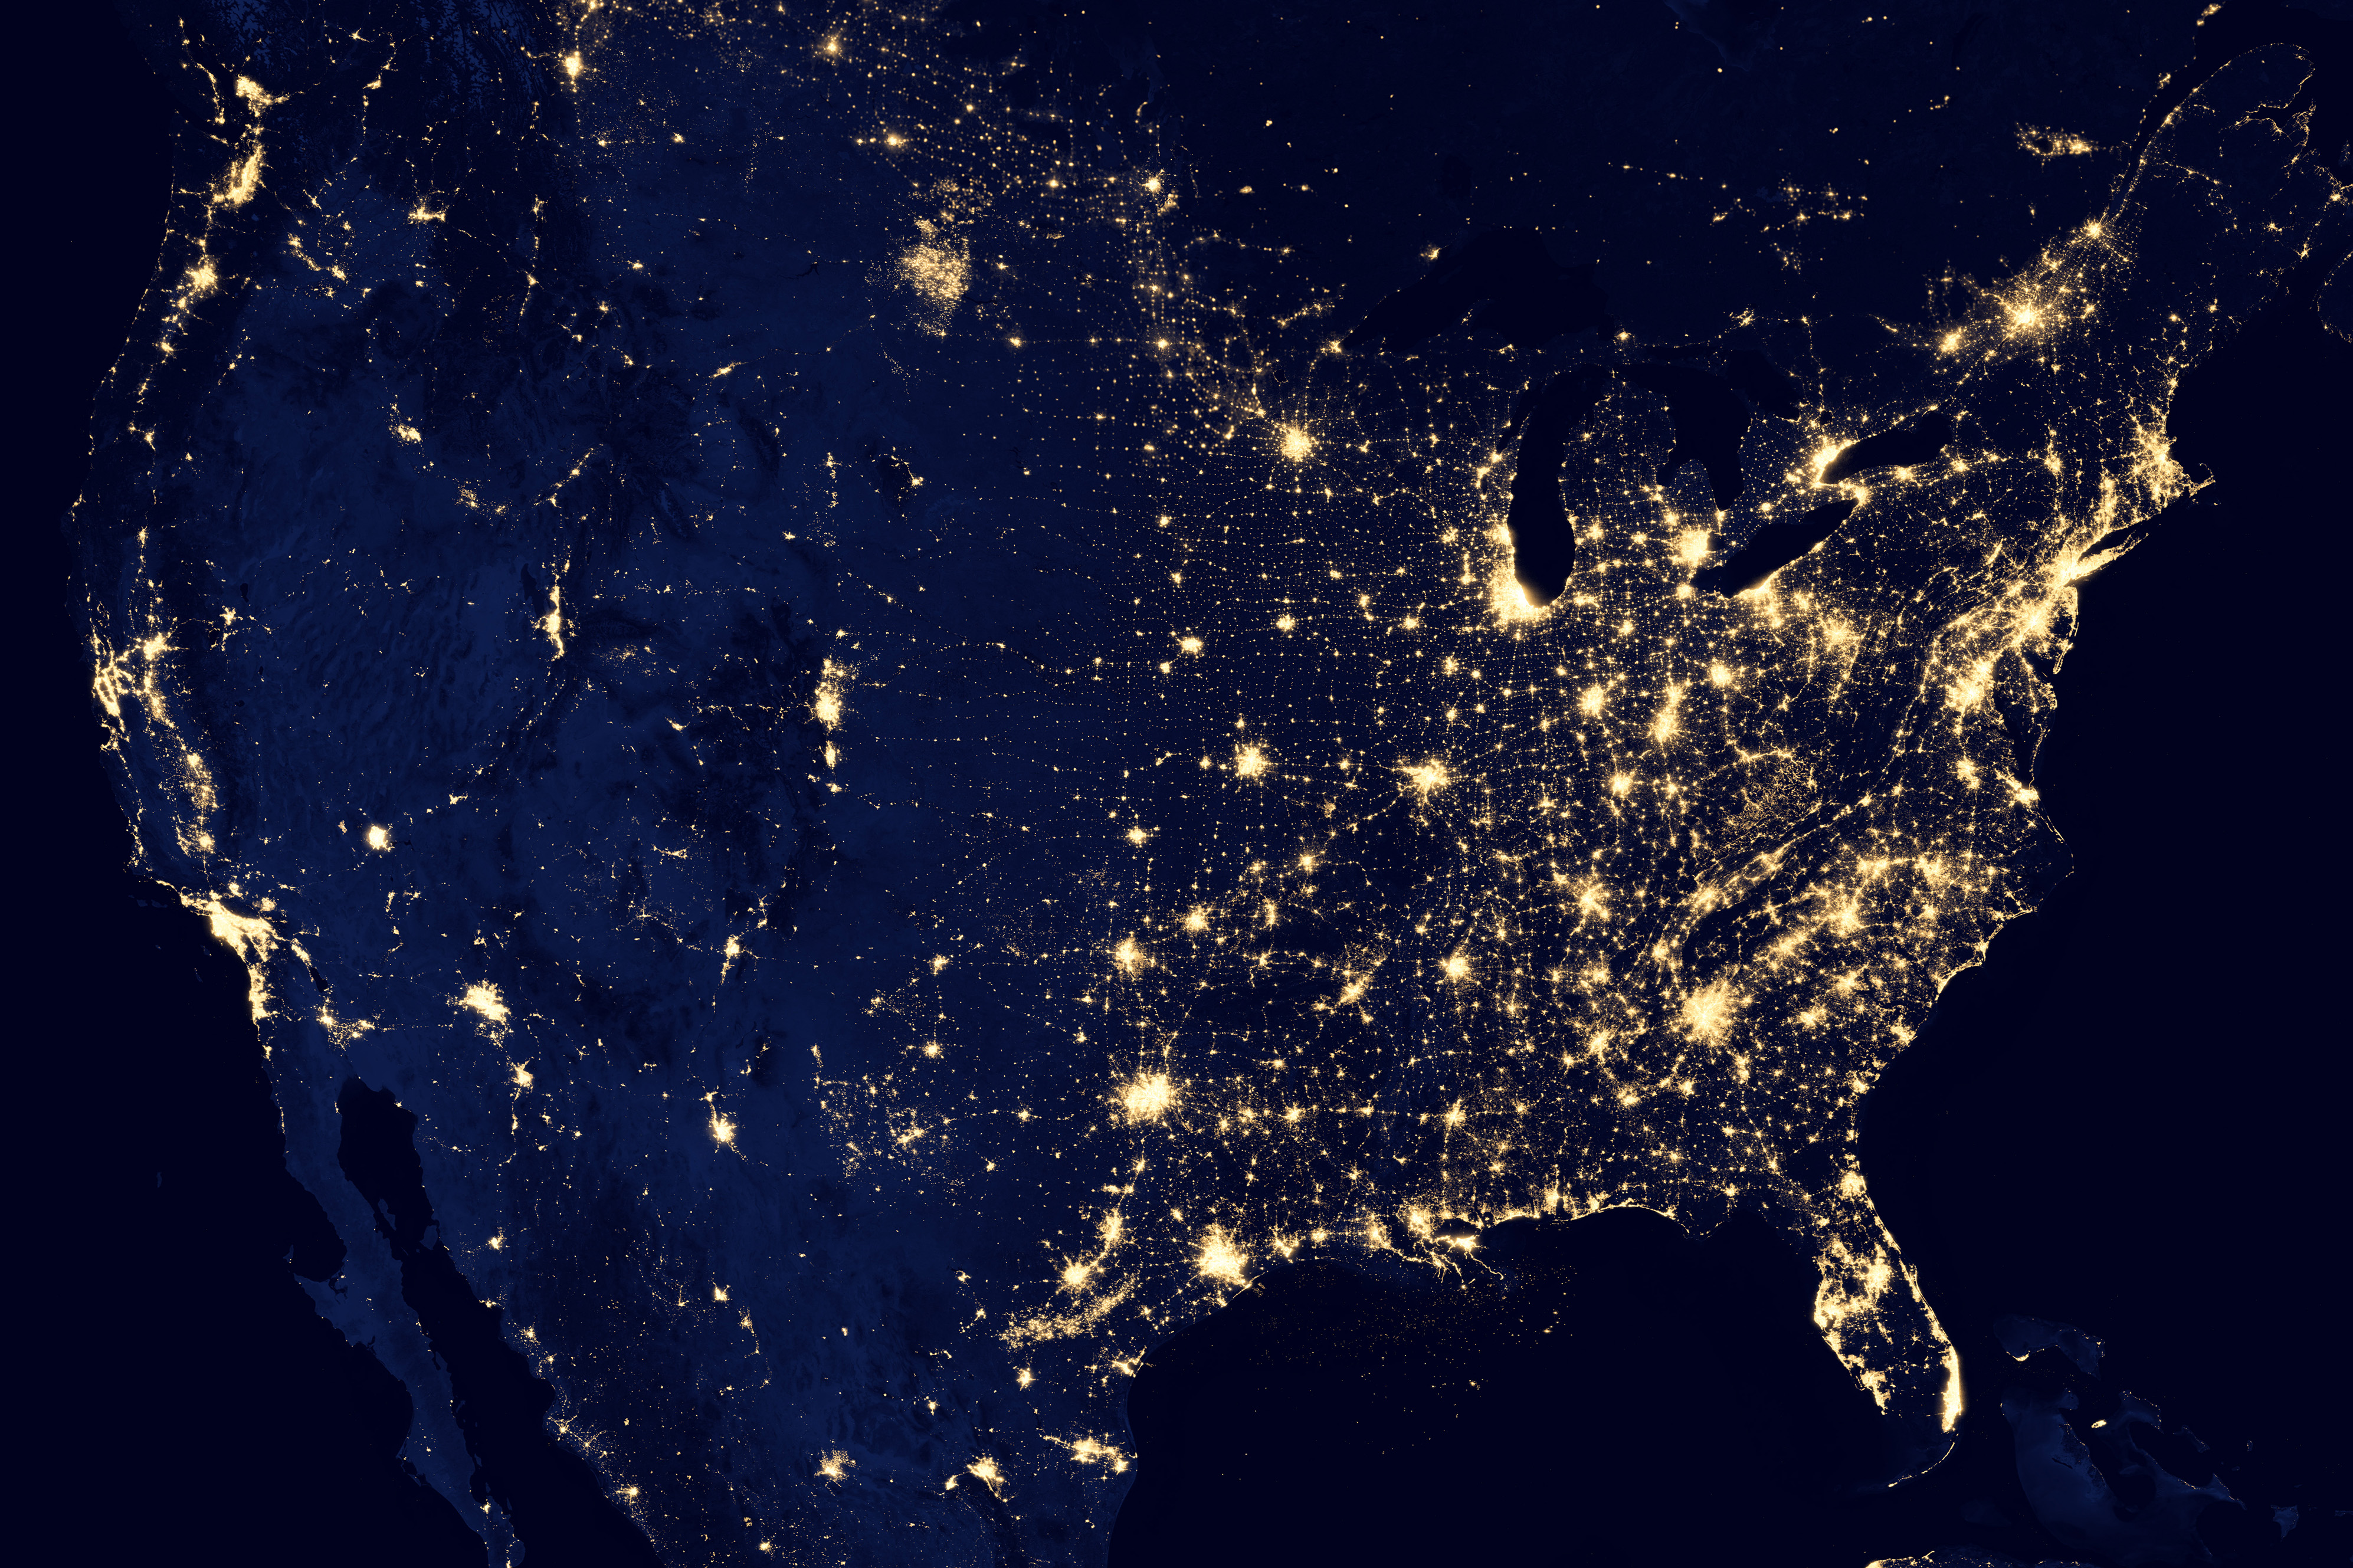 The prevalence of bright city lights in the U.S. already makes it difficult for anyone living east of the Mississippi River to see the night sky. Even in the west, more lights and poor lighting practices have begun to take a toll. 